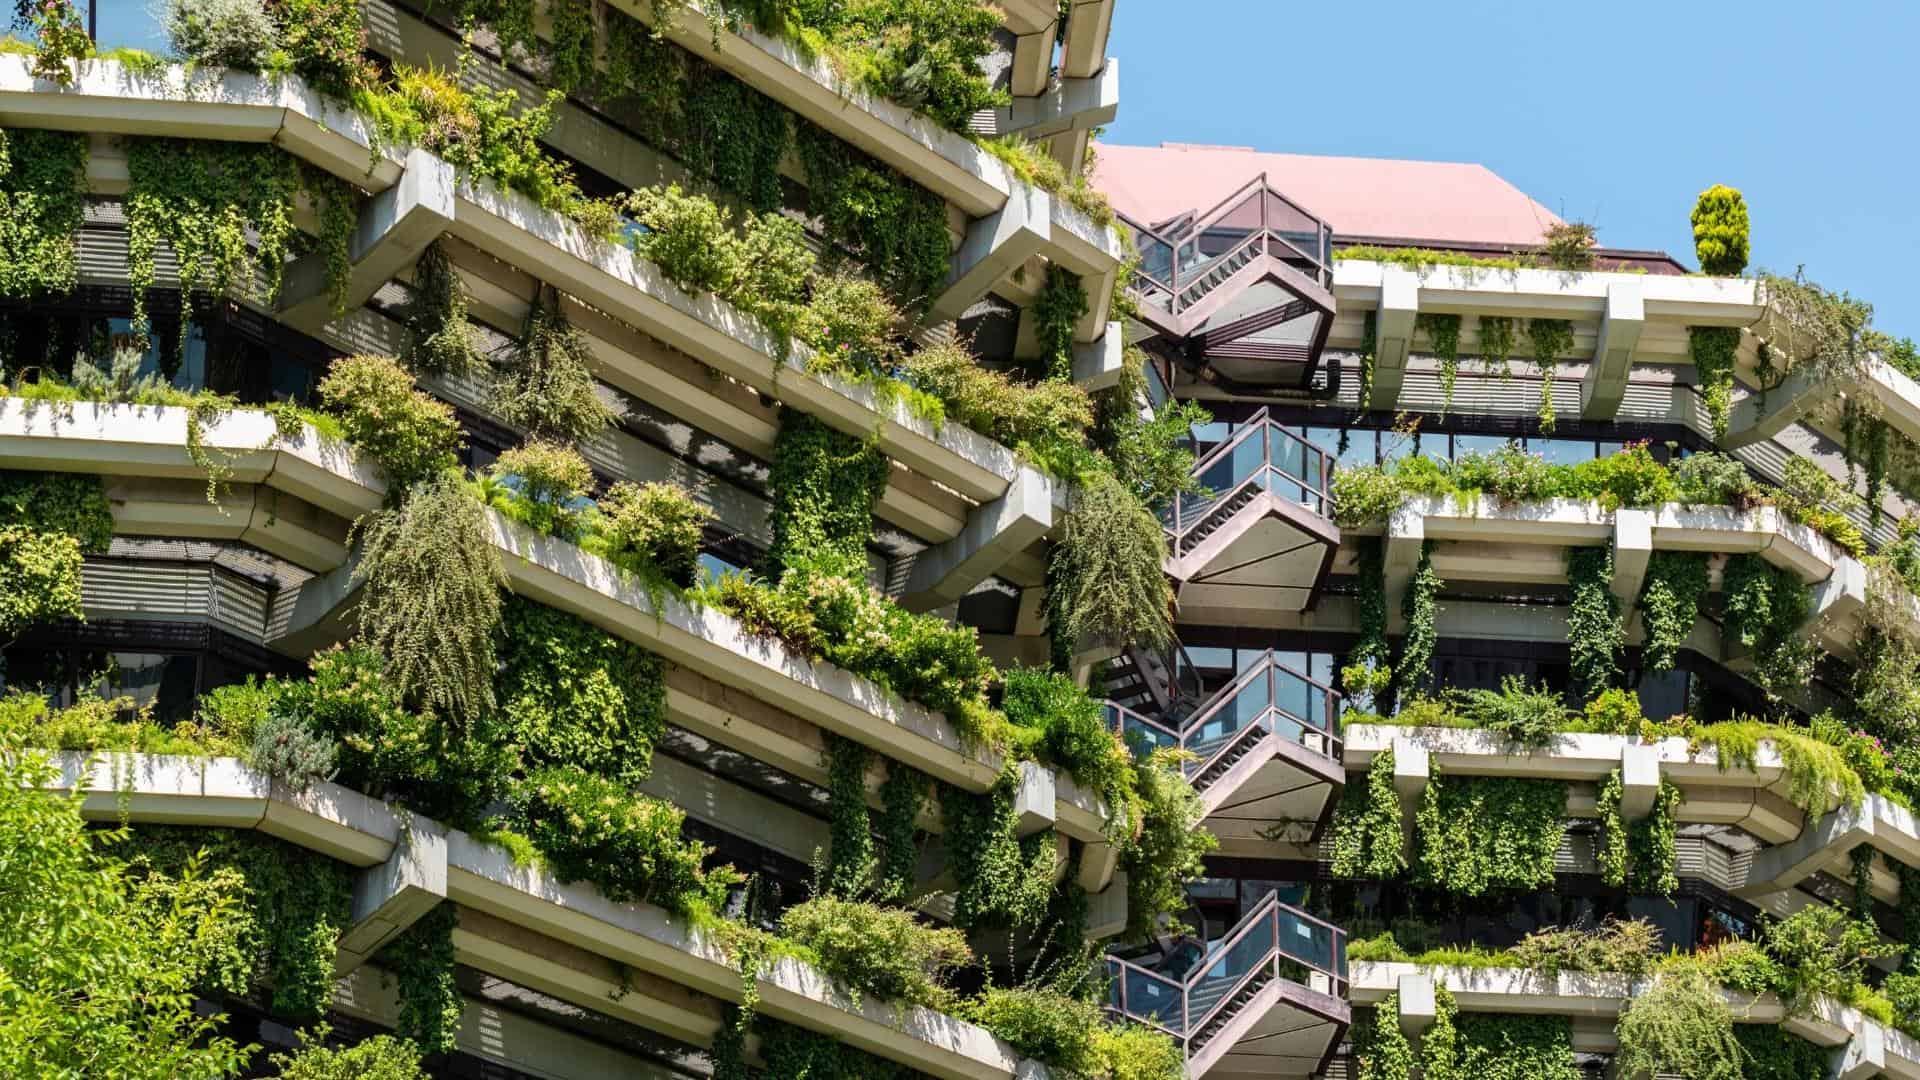 Barcelona moves forward to become a more sustainable city